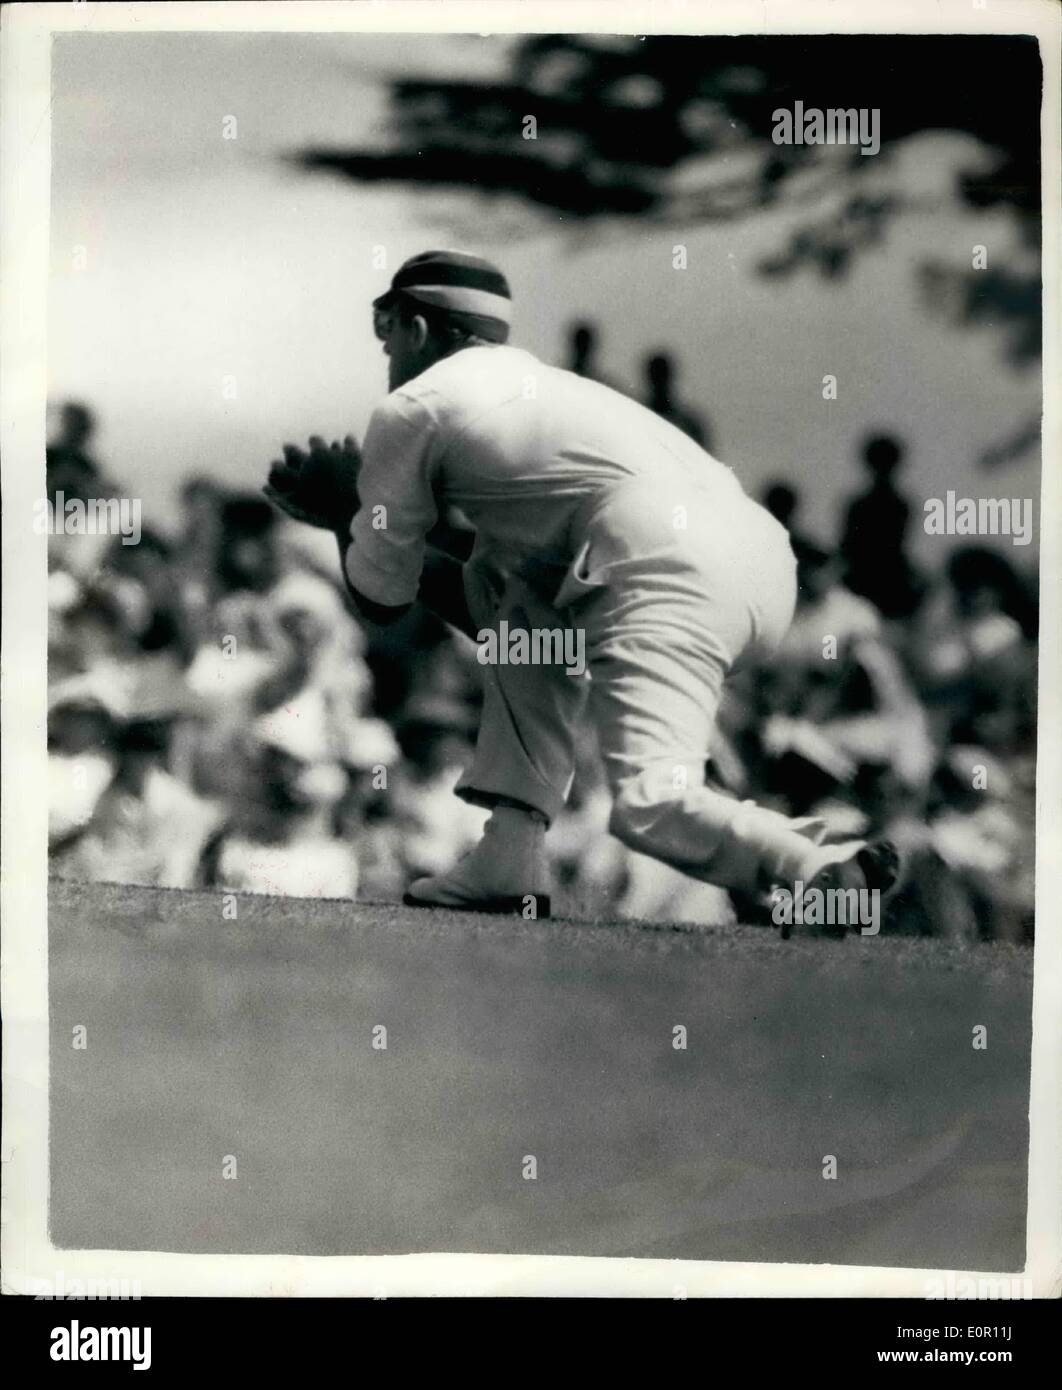 Aug. 08, 1957 - The Duke of Edinburgh plays Cricket.: H.R.H. The Duke of Edinburgh played cricket yesterday afternoon when he captained a side against the Duke of Norfilk's Xi in the grounds of Arundal Castle. Photo shows the Duke shapes for a catch, it was a ''sitter''from the Duke of Norfolk, but the Duke of Edinburgh dropped it. Stock Photo